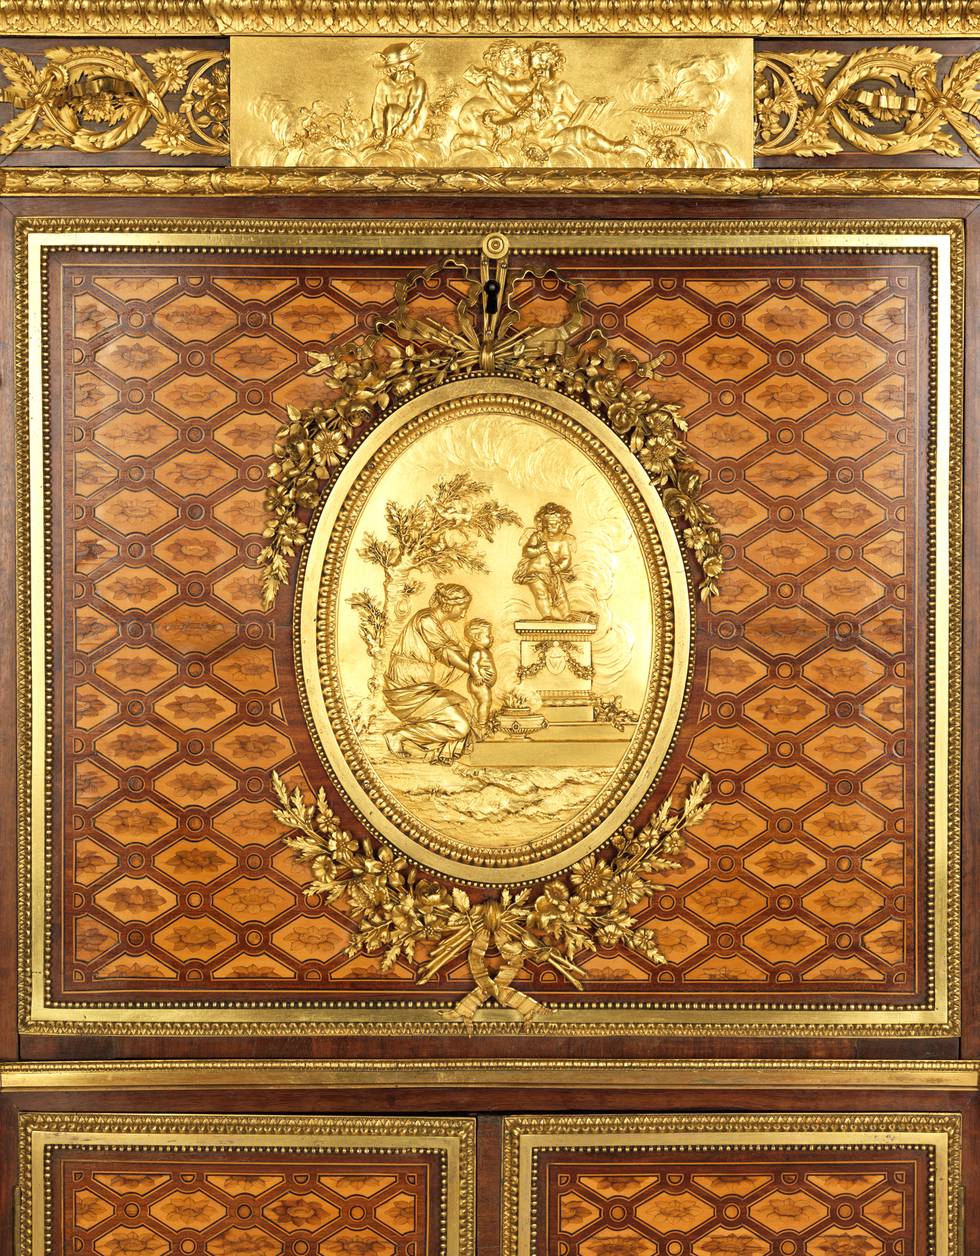 A detail of the frieze and fall-front of a marquetry fall-front desk